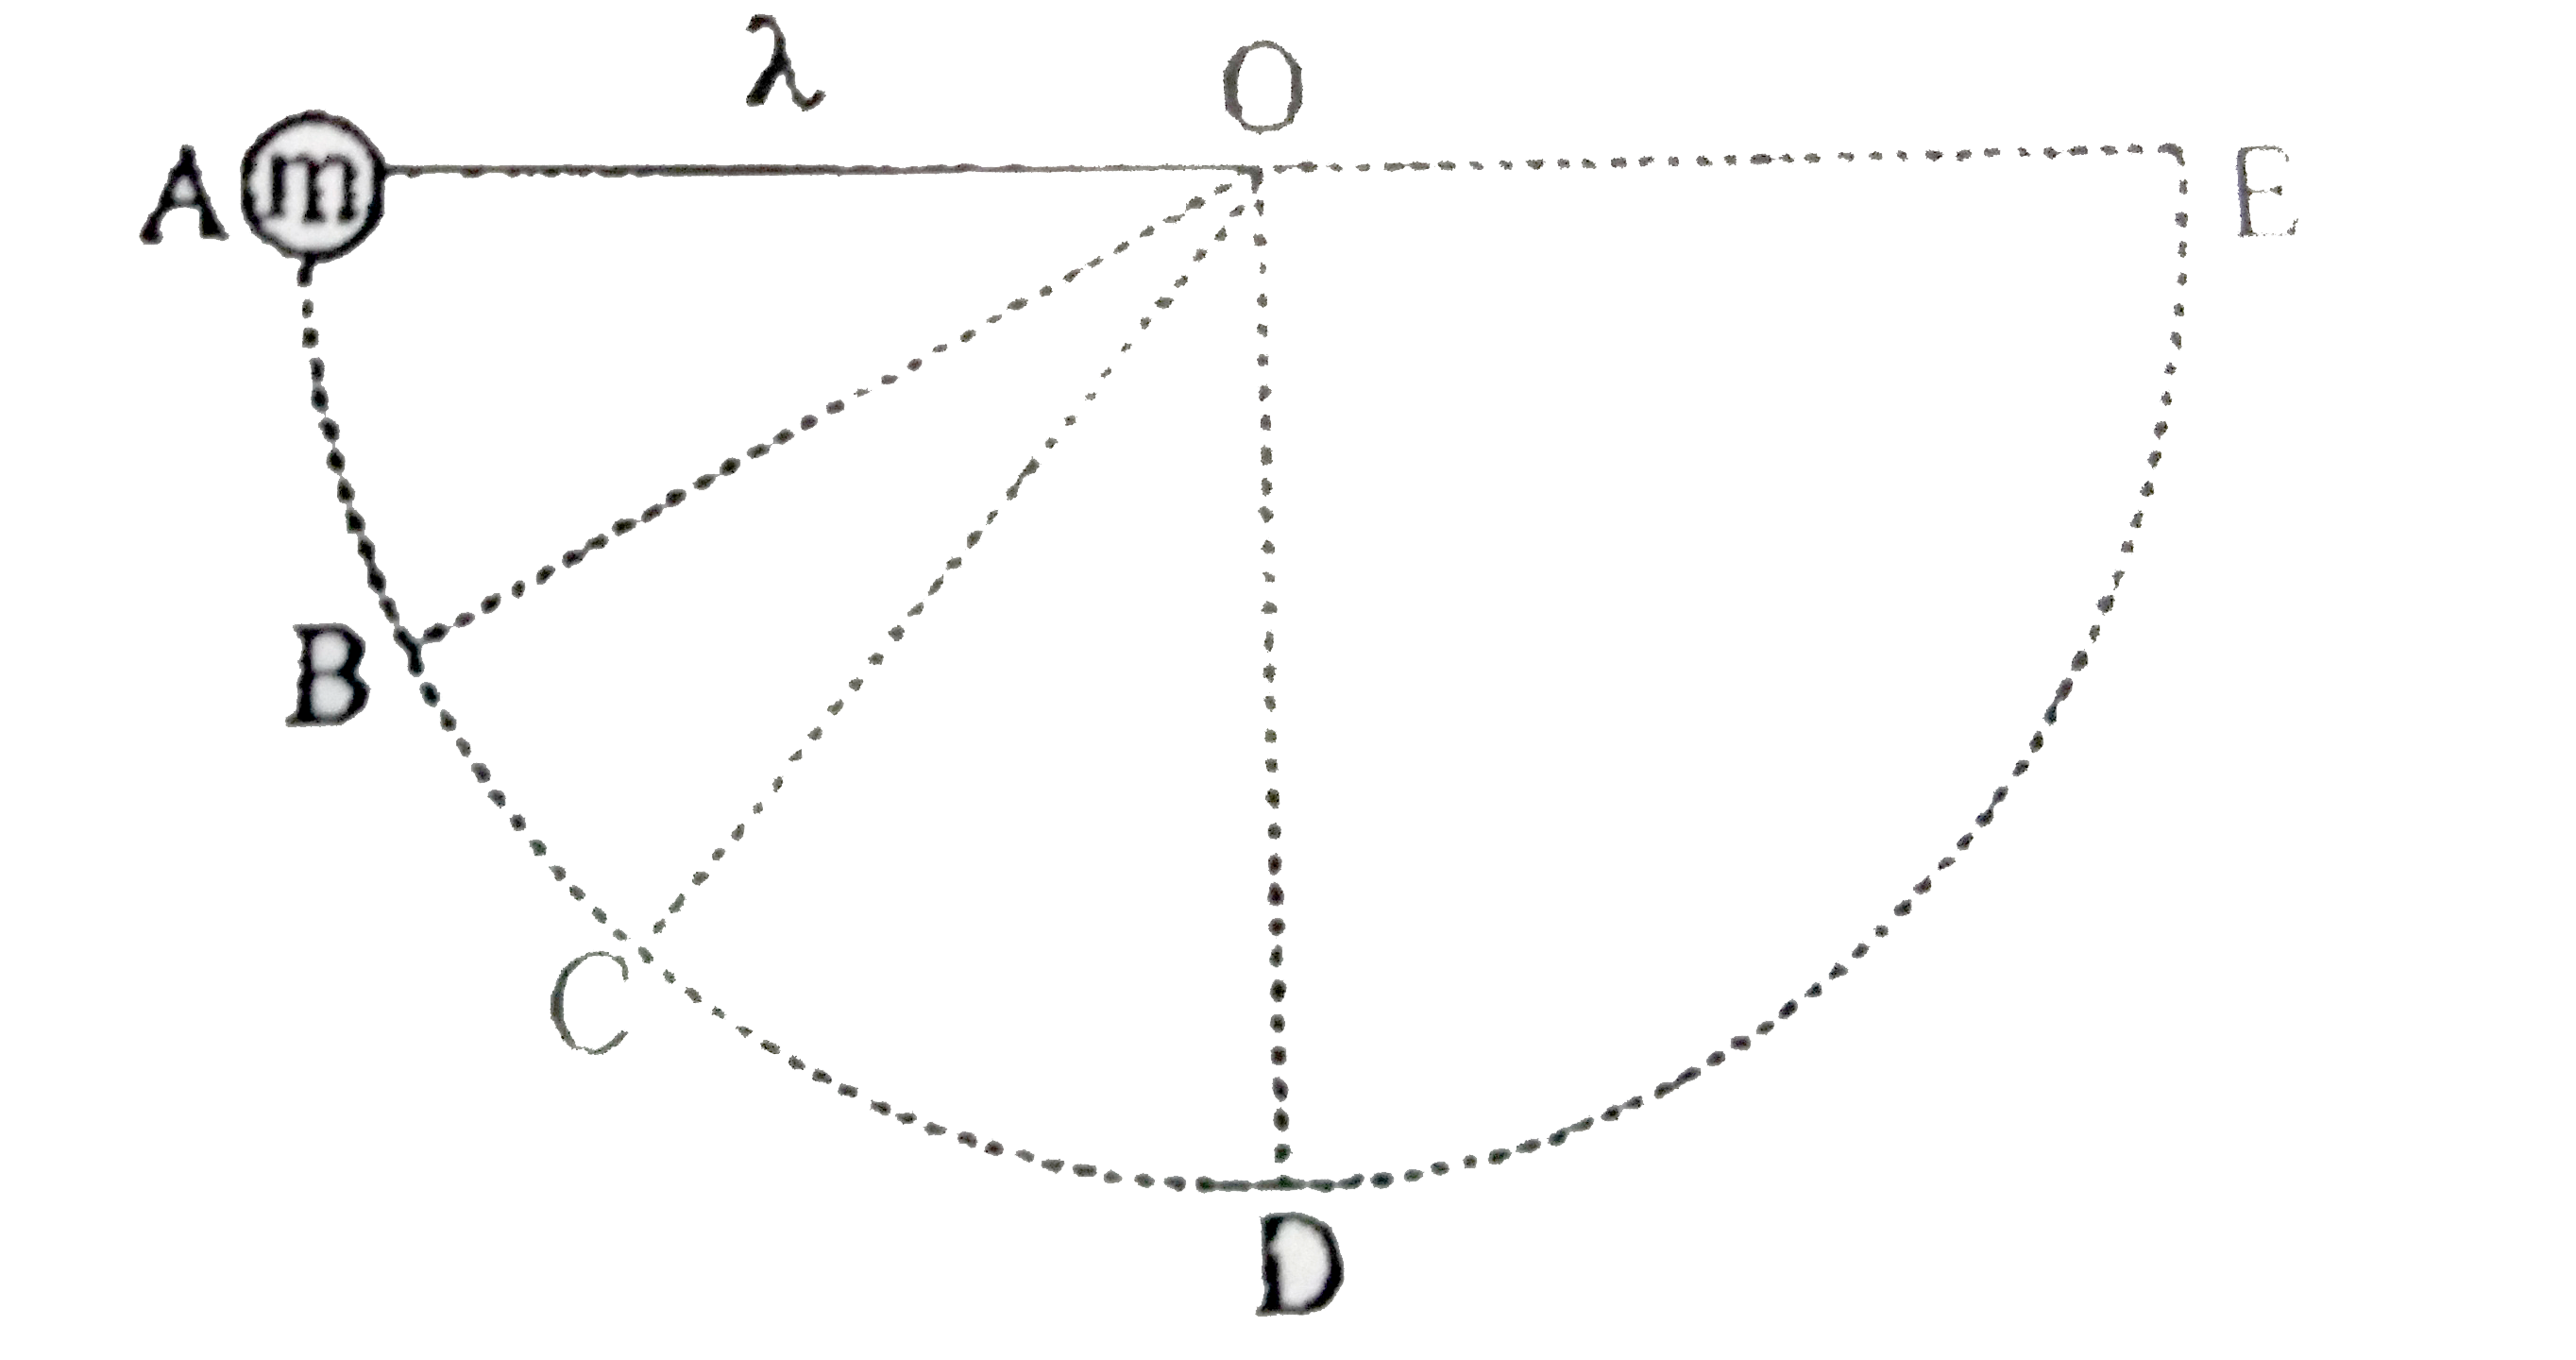 A pendulum bob 'm' is released from rest from horizontal position as shown in the figure. ltbr. Choose the position where the chance of. Braking of the string is maximum.